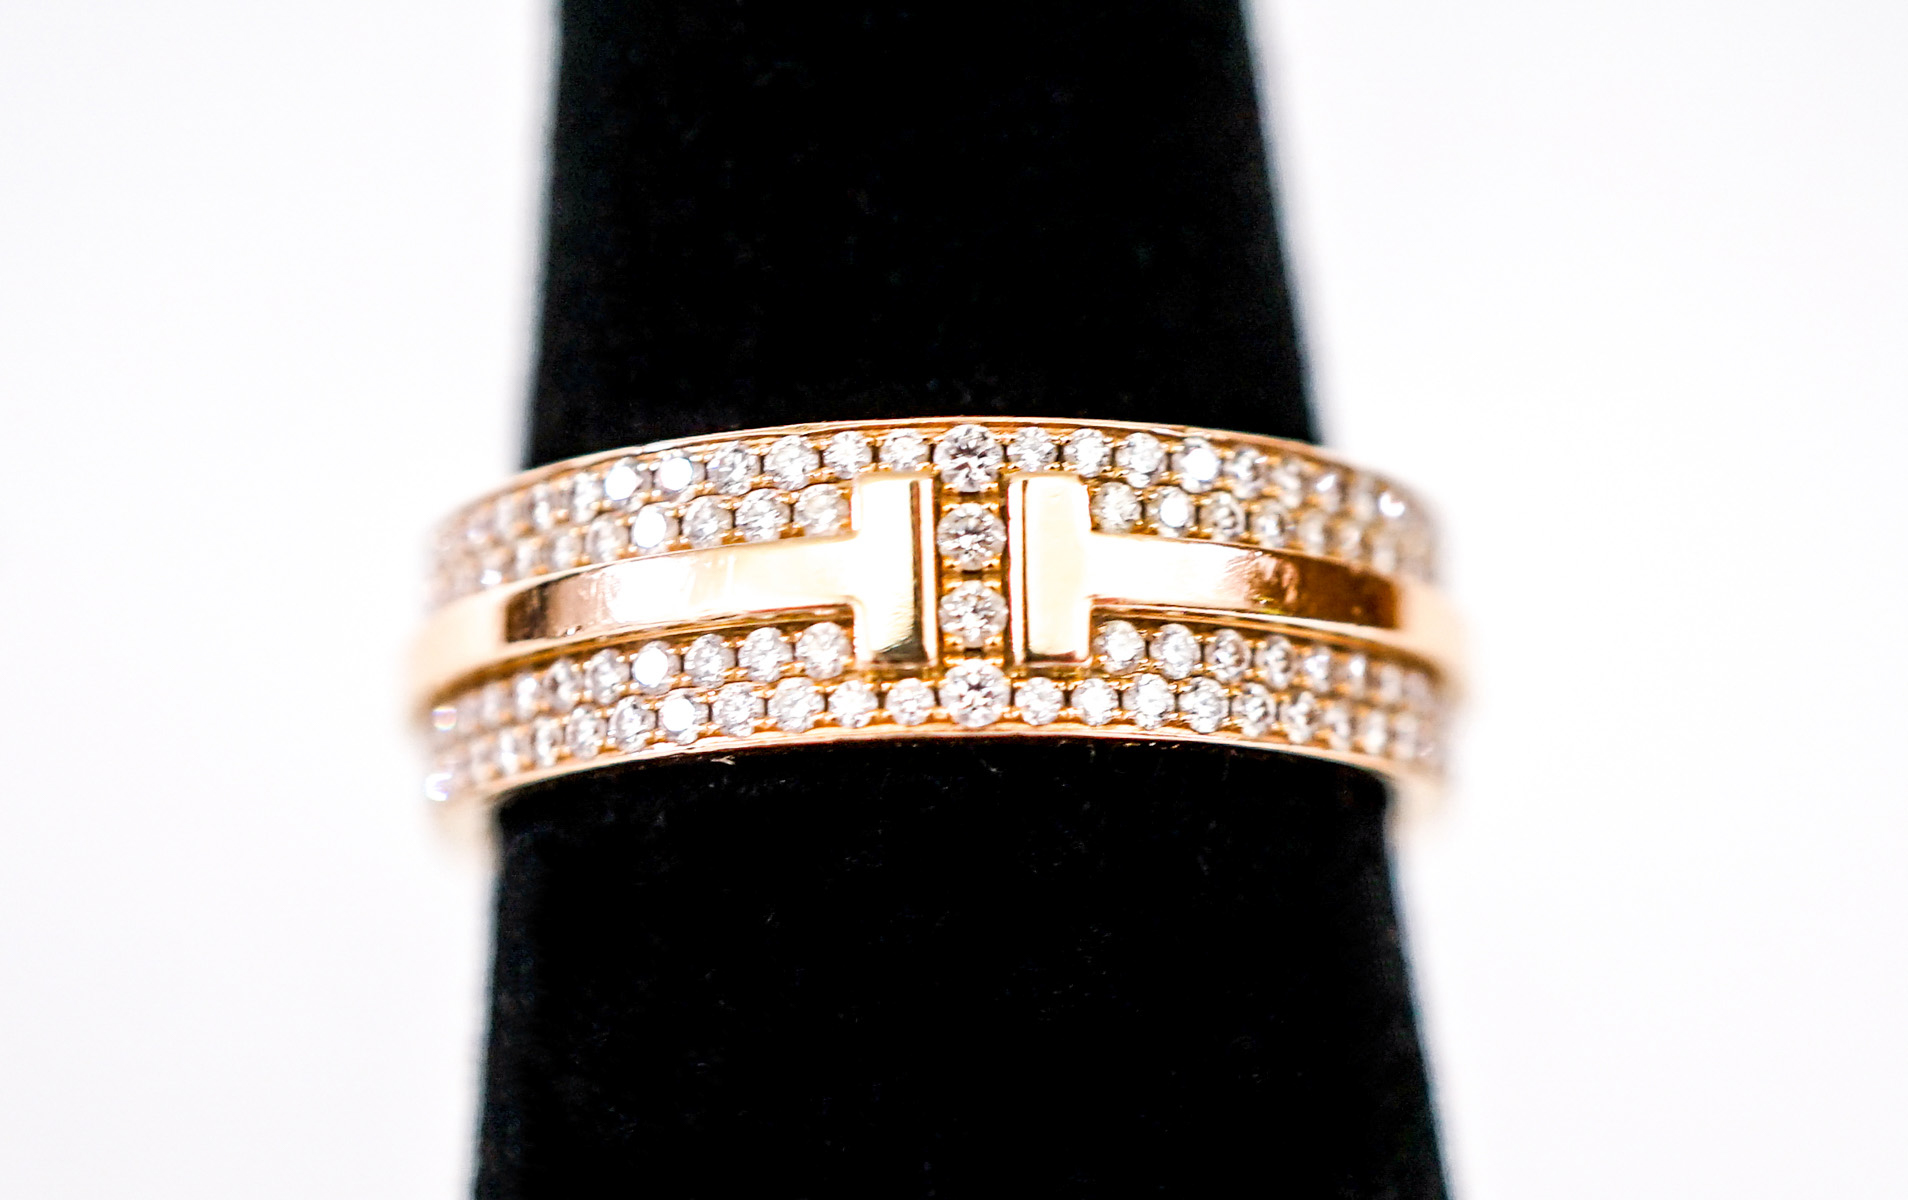 Tiffany & Co. 18k Gold and Diamonds Ring